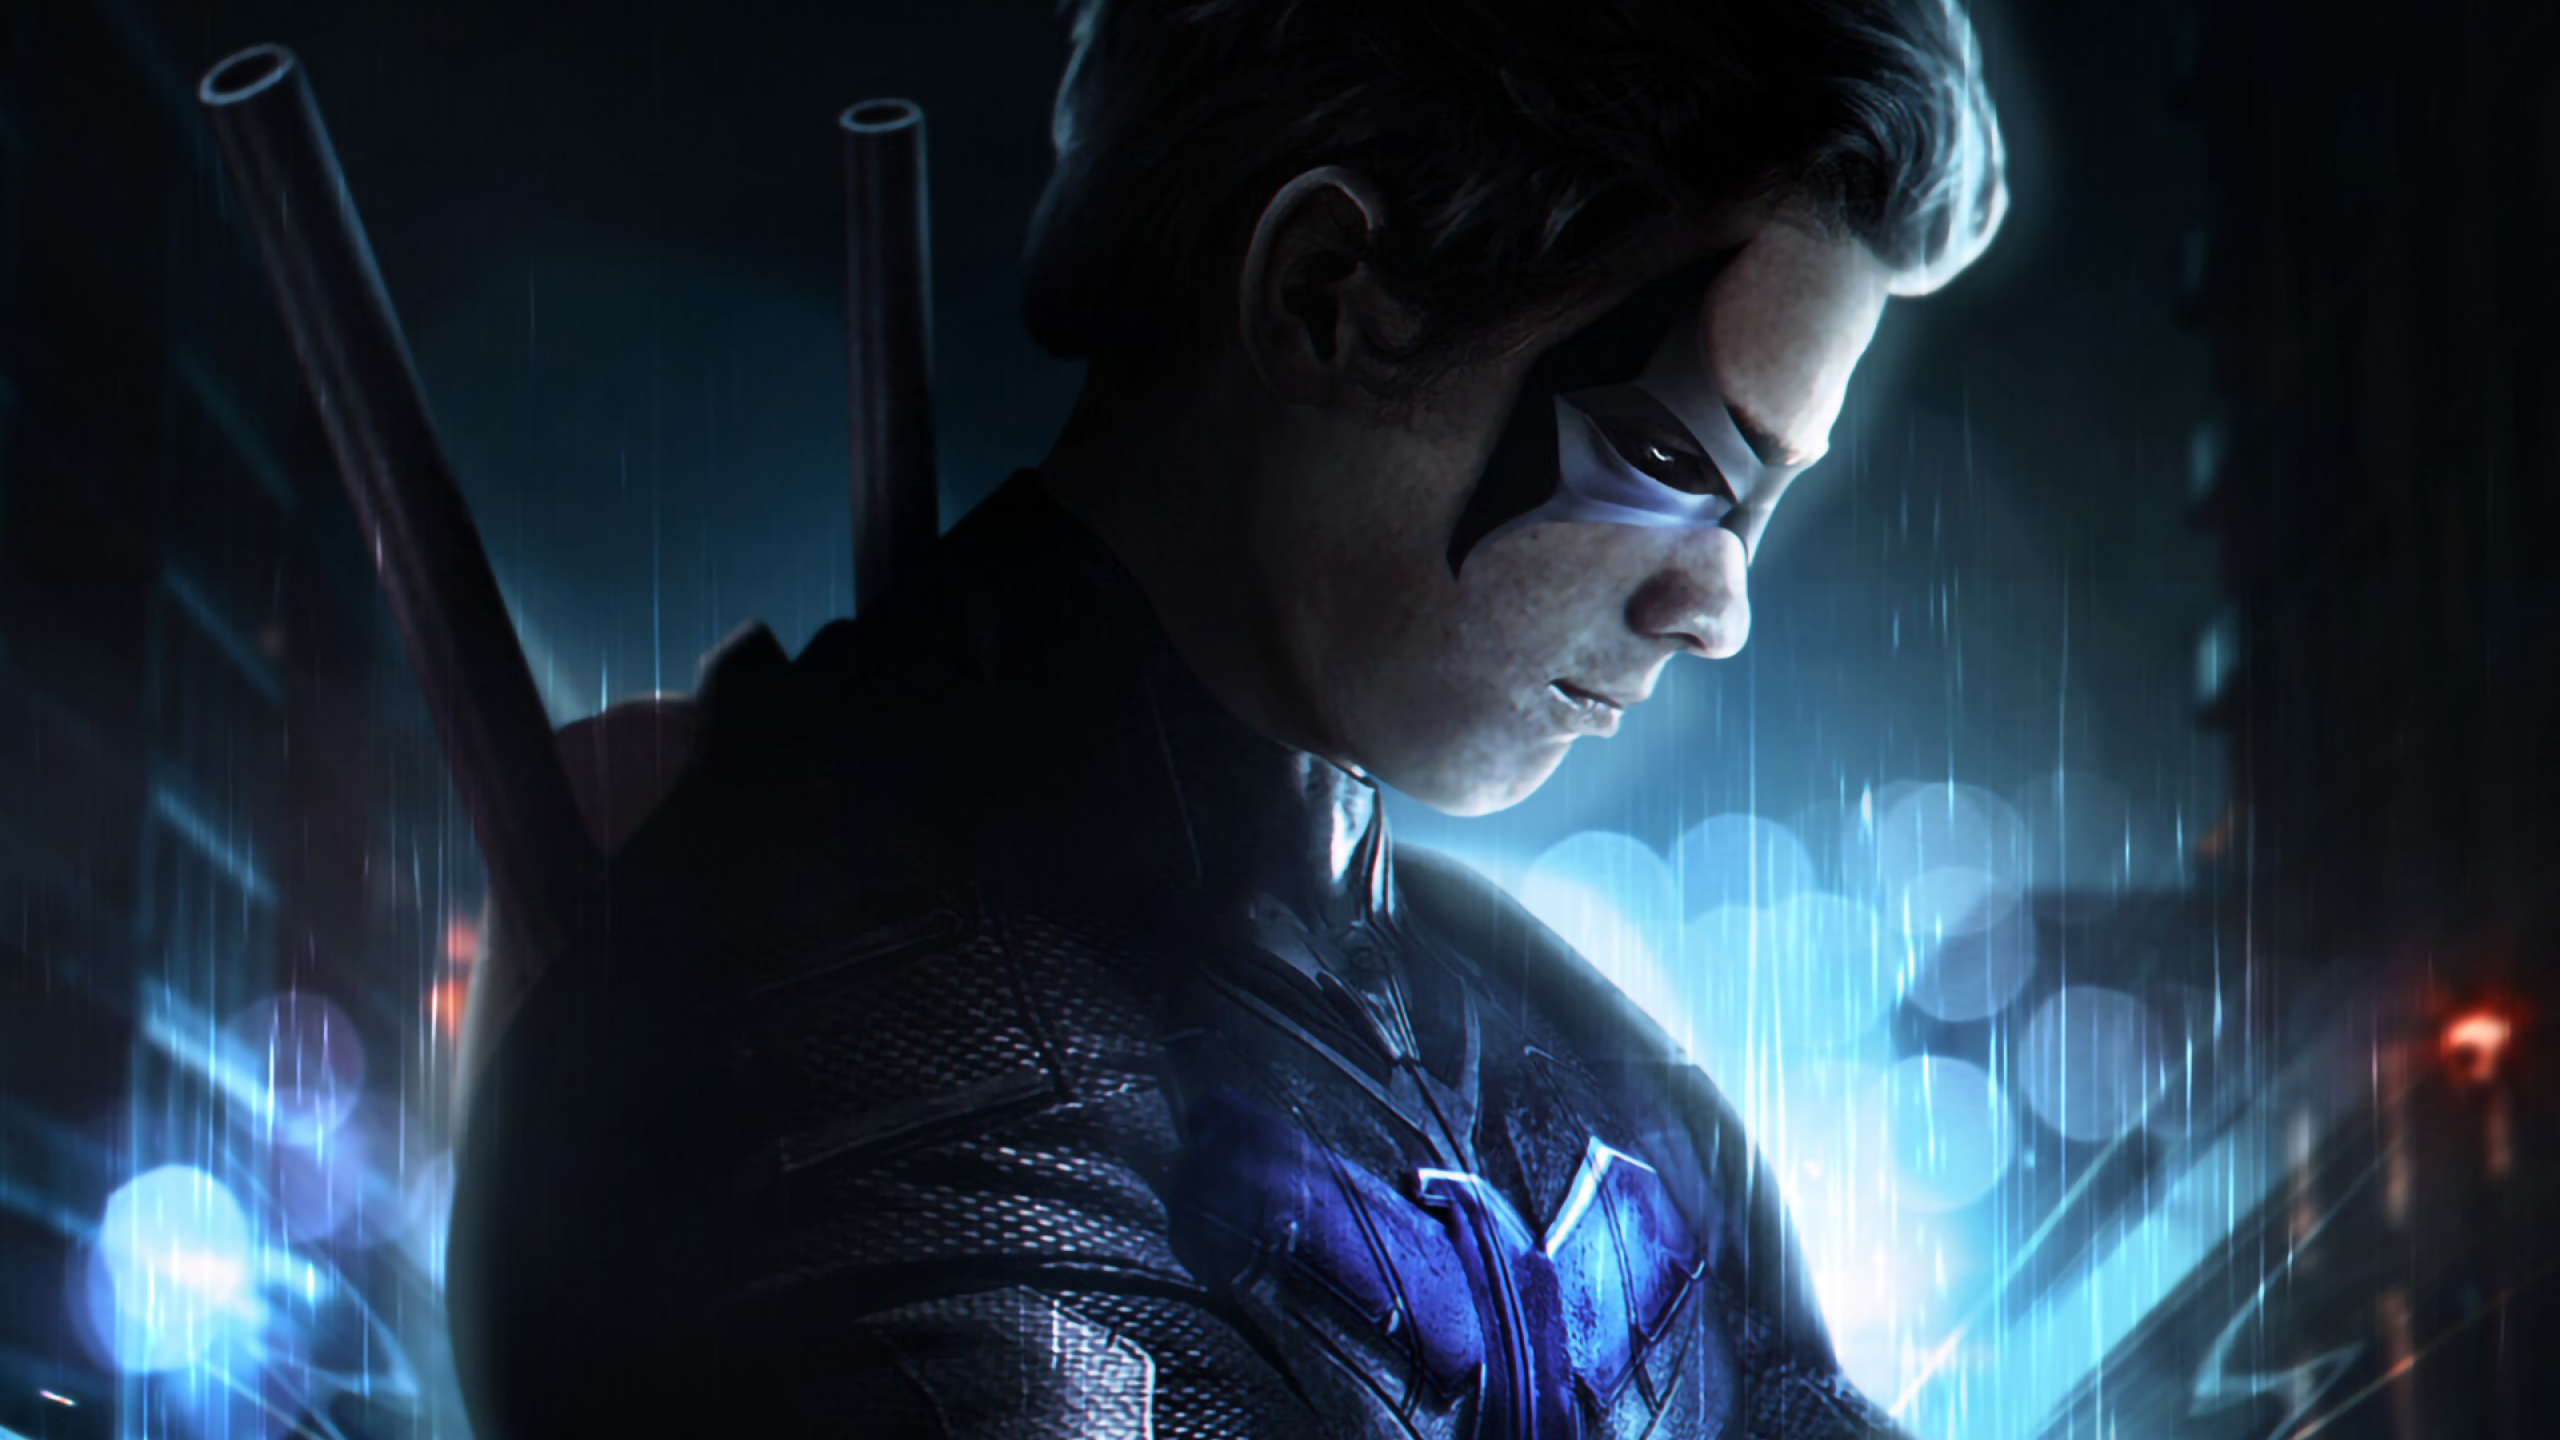 Titans Nightwing Wallpaper Iphone , HD Wallpaper & Backgrounds